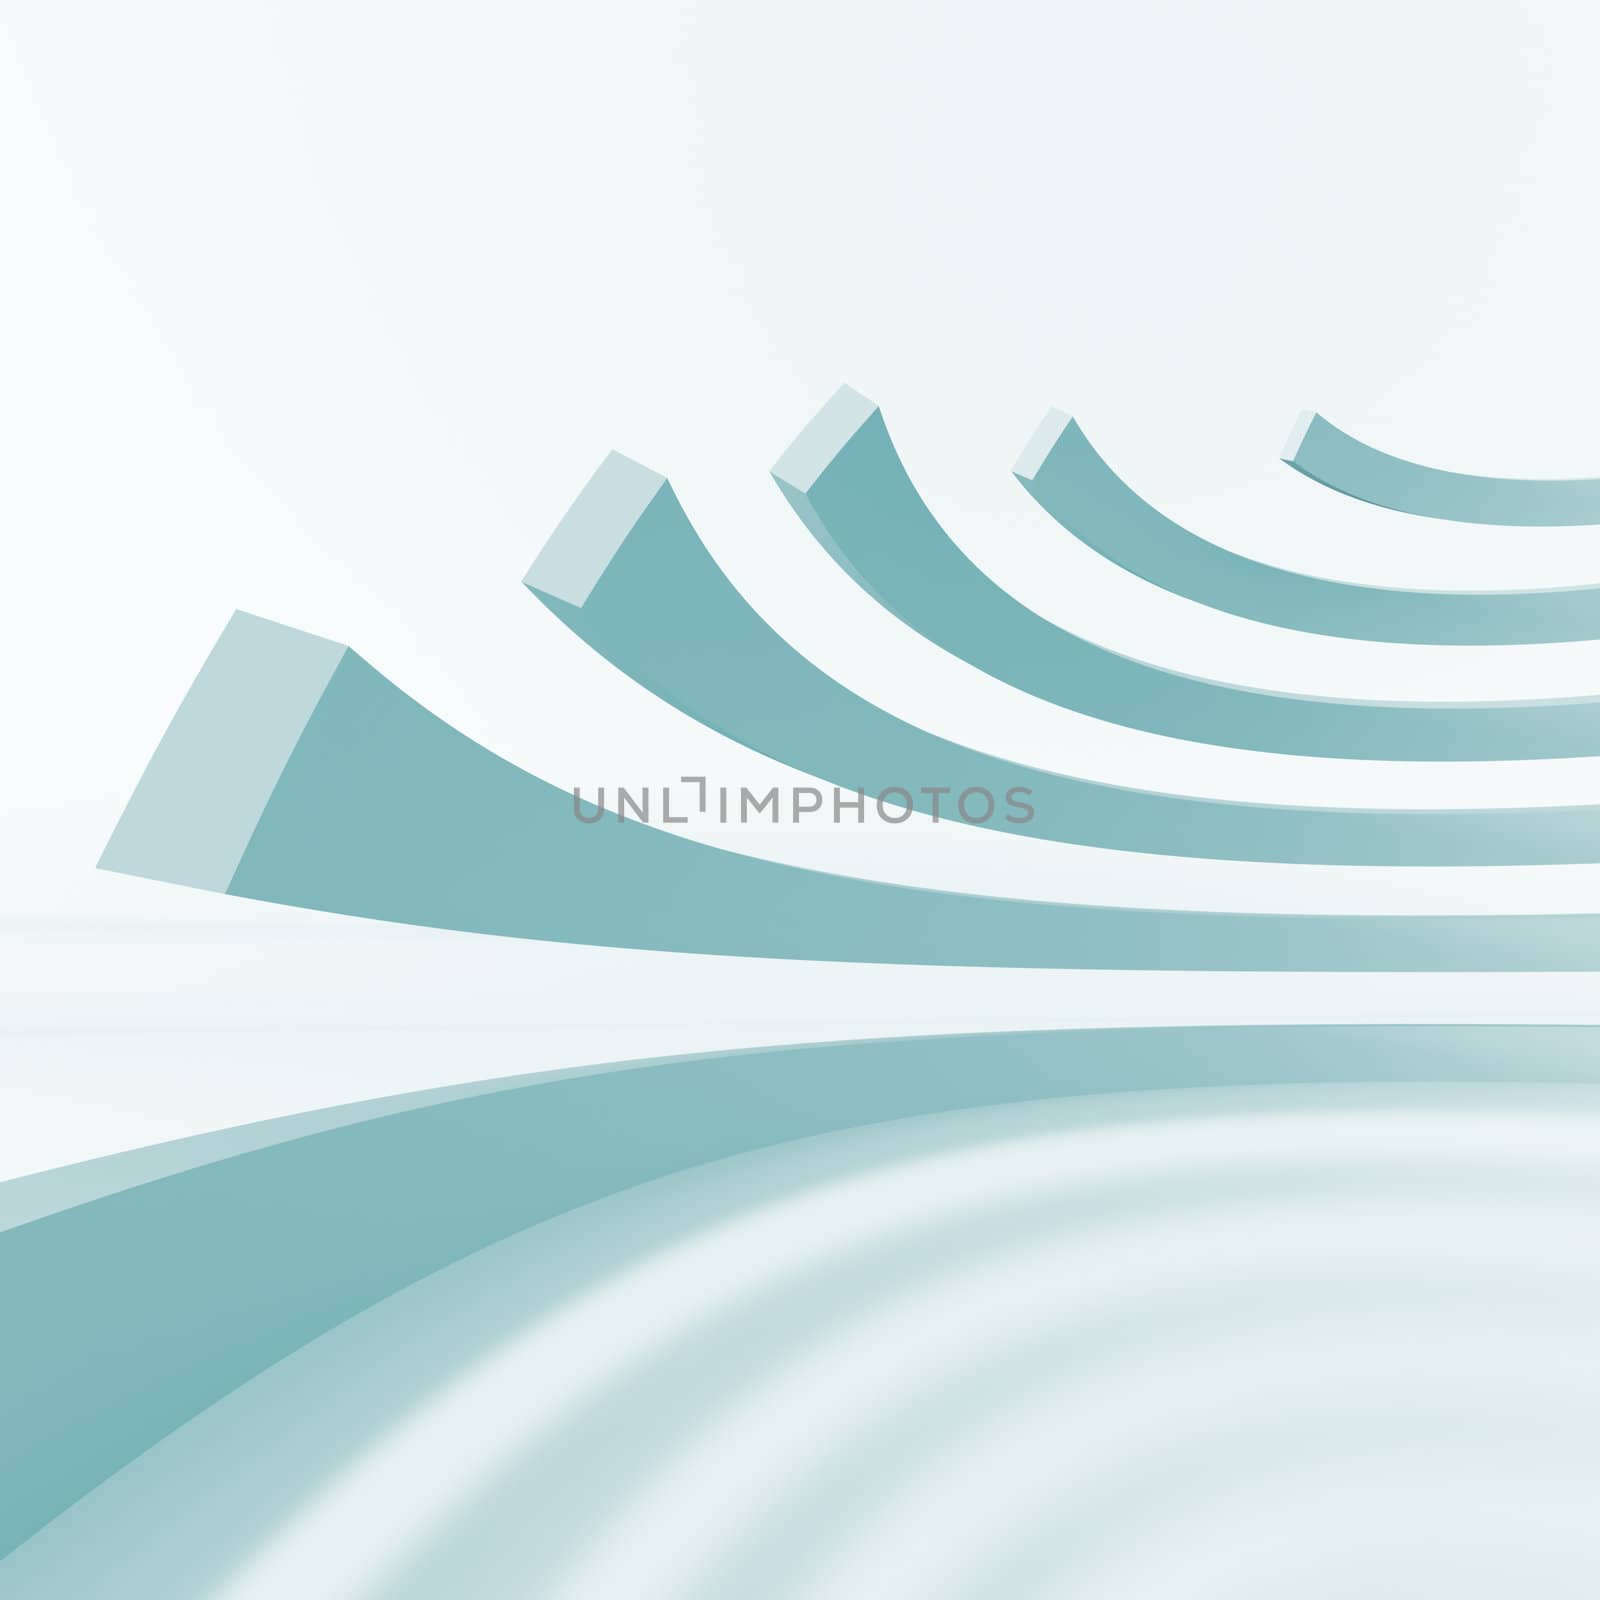 3d Illustration of Blue Abstract Architecture Background